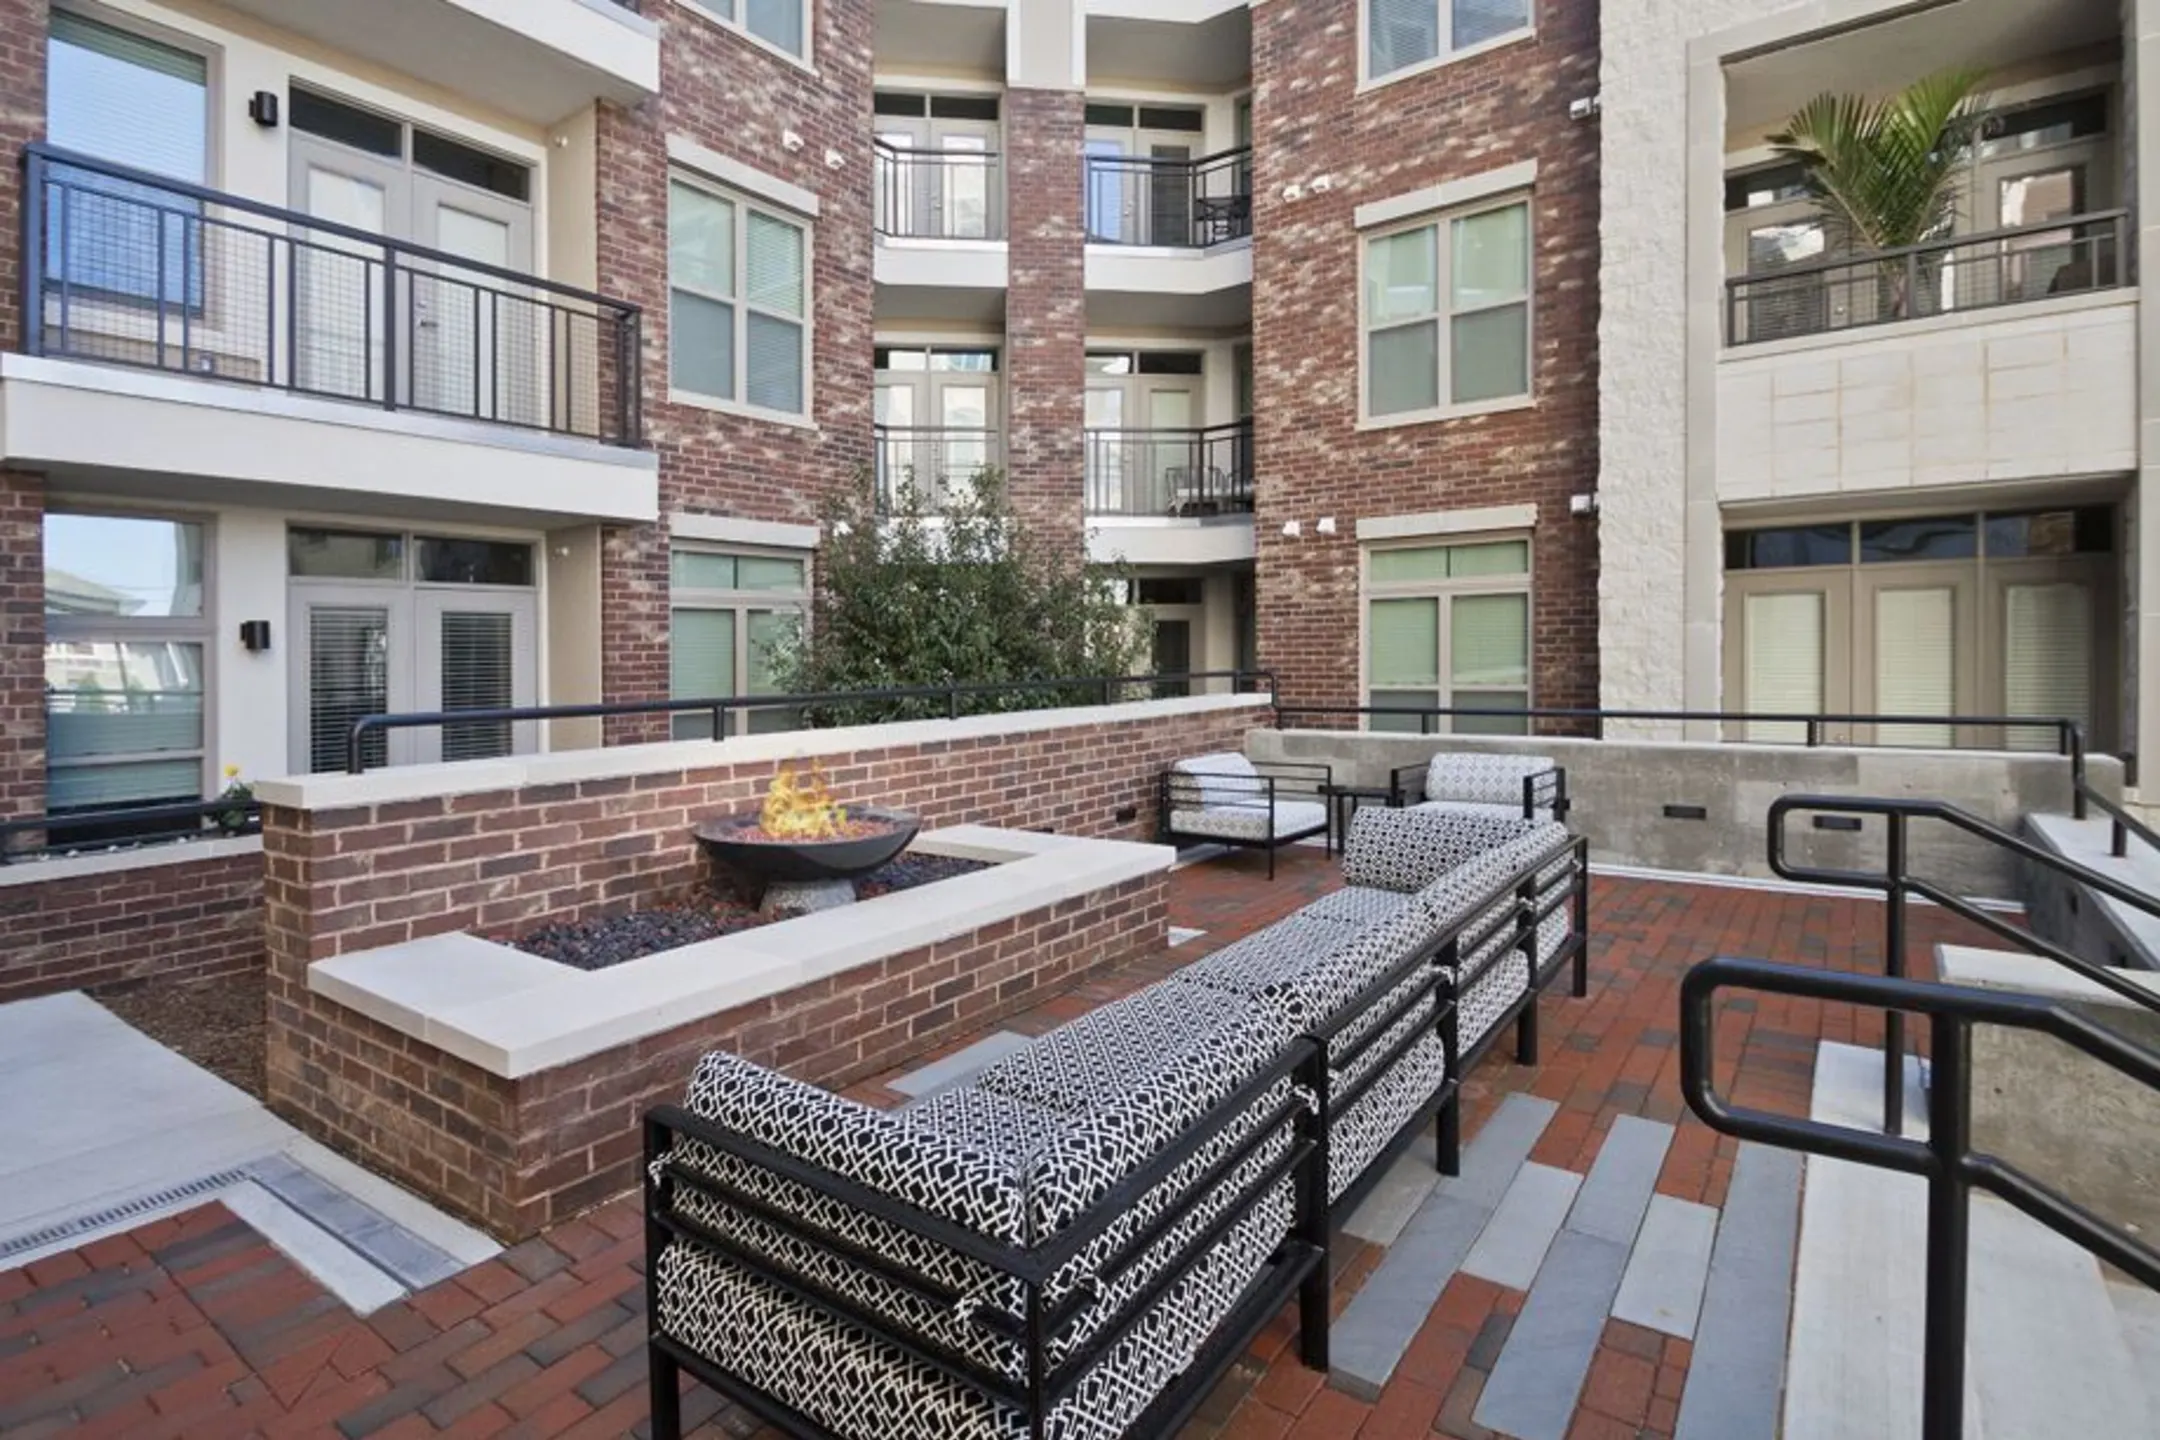 Building - Camden Southline Apartments - Charlotte, NC